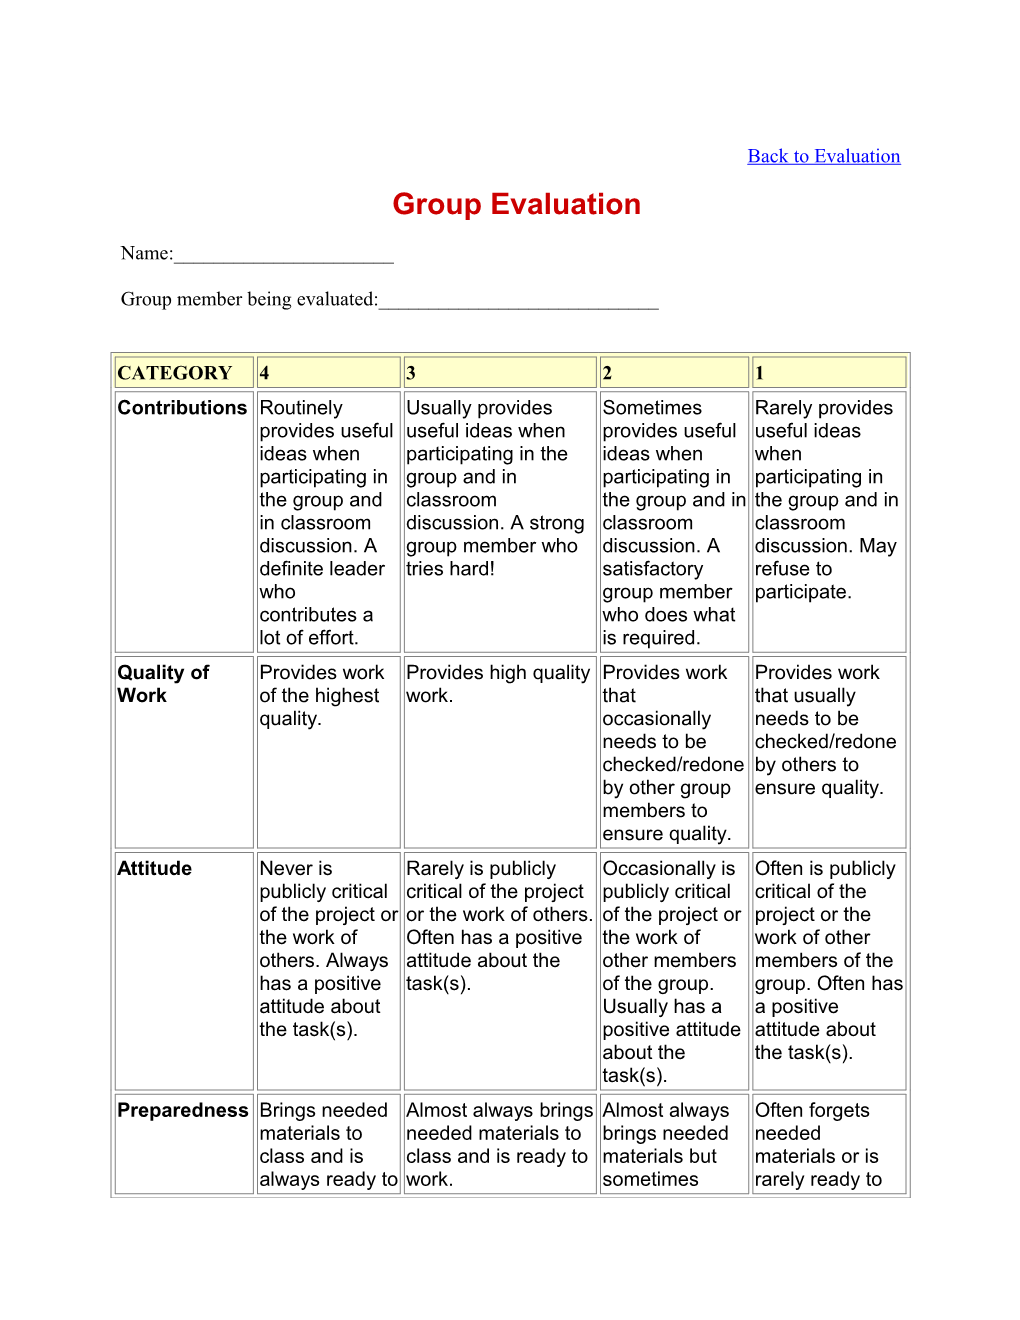 Group Evaluation Rubric